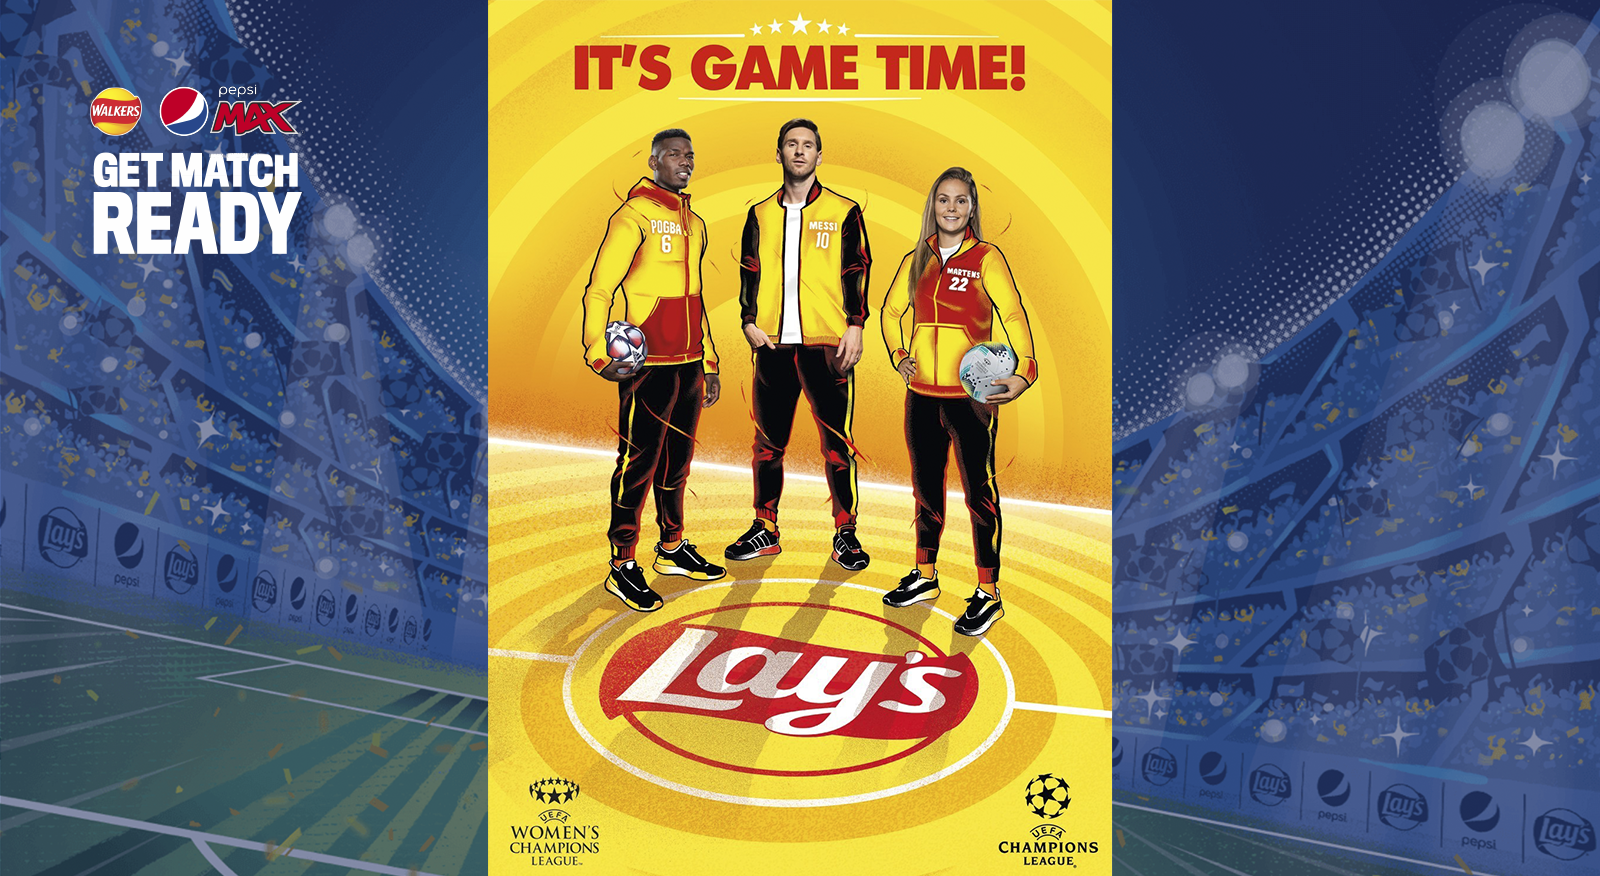 Lay’s® and Pepsi Max Team Up with Lionel Messi, Lieke Martens and Paul Pogba to Bring Joy Through Football